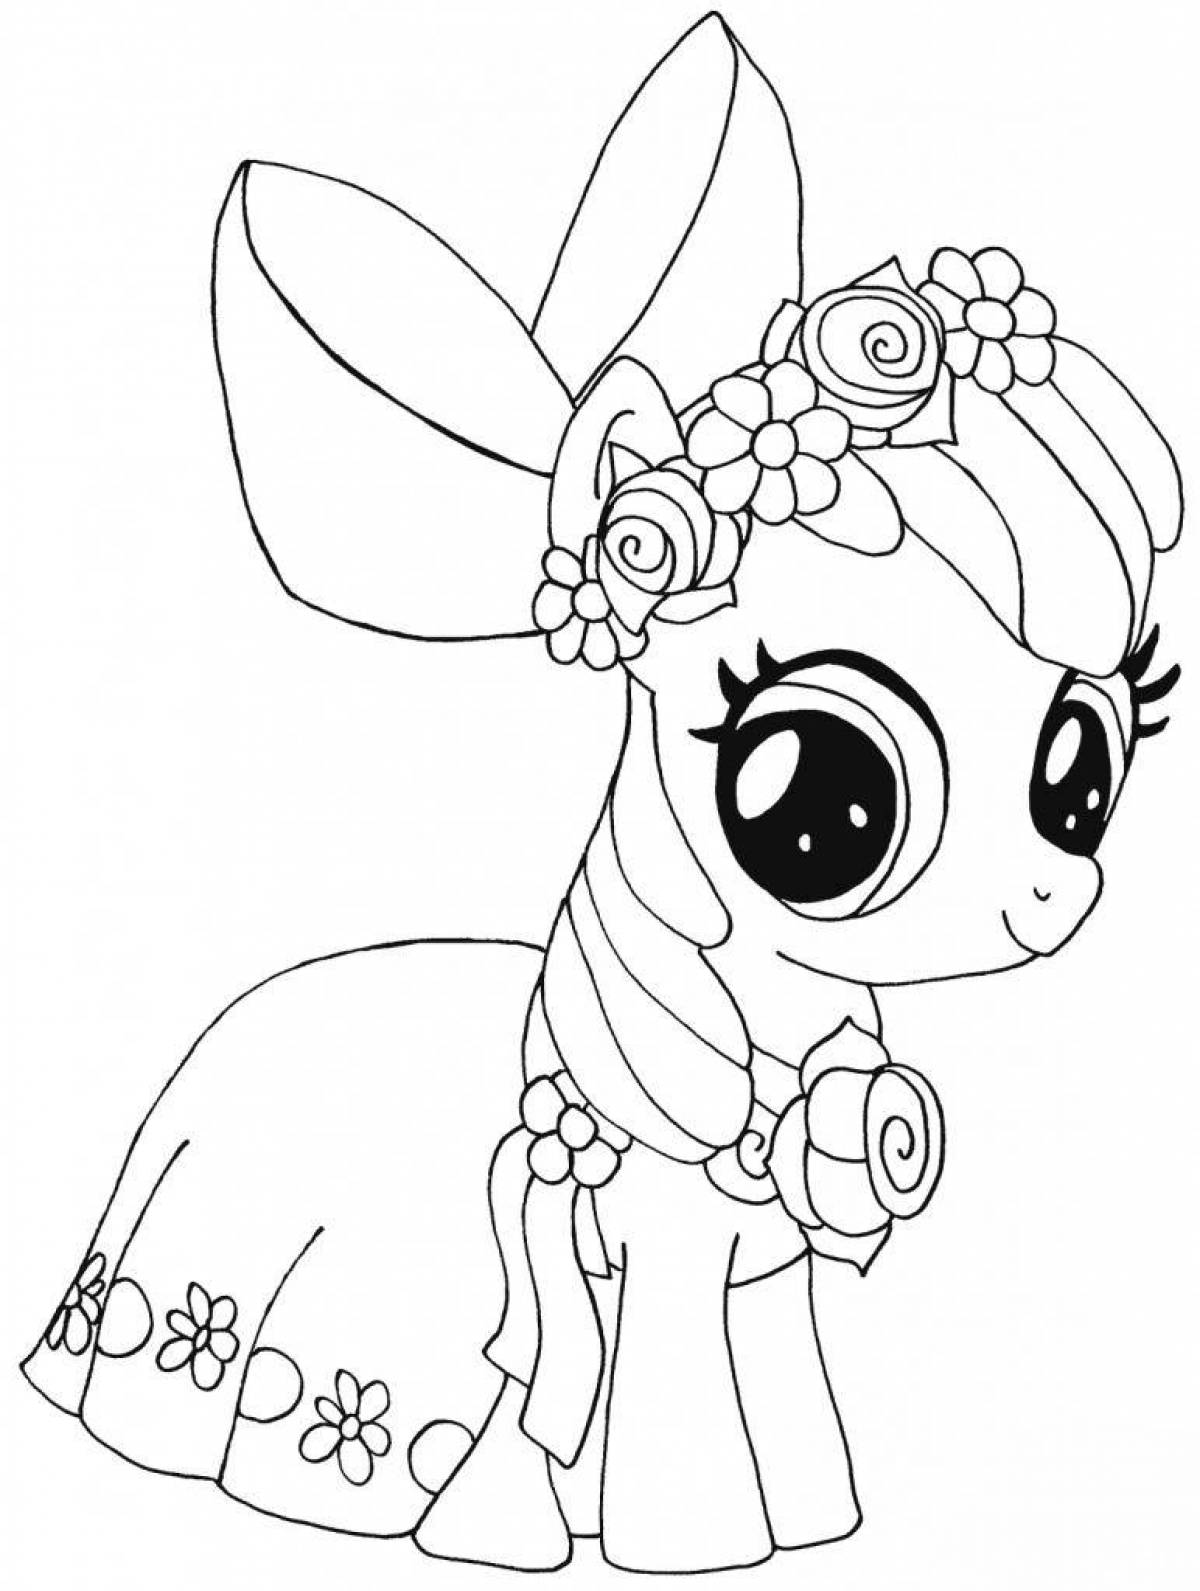 Adorable pony coloring in a dress